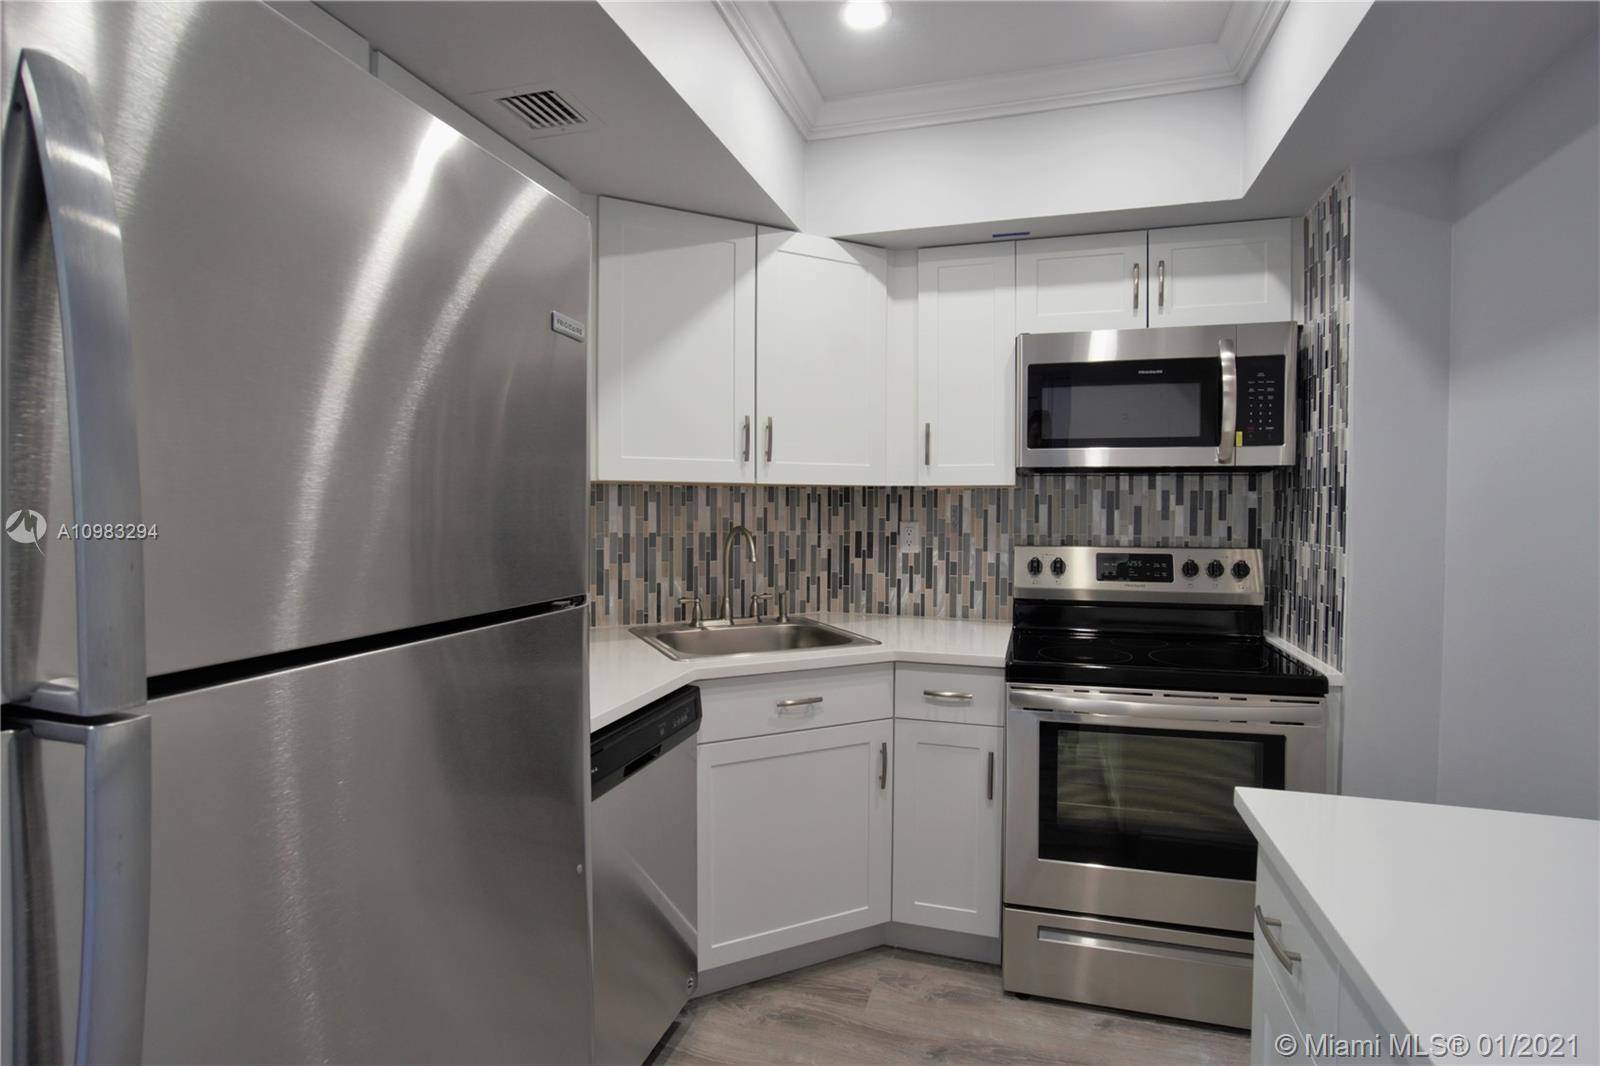 Walk to downtown Mizner Park area from this brand new renovated condo.